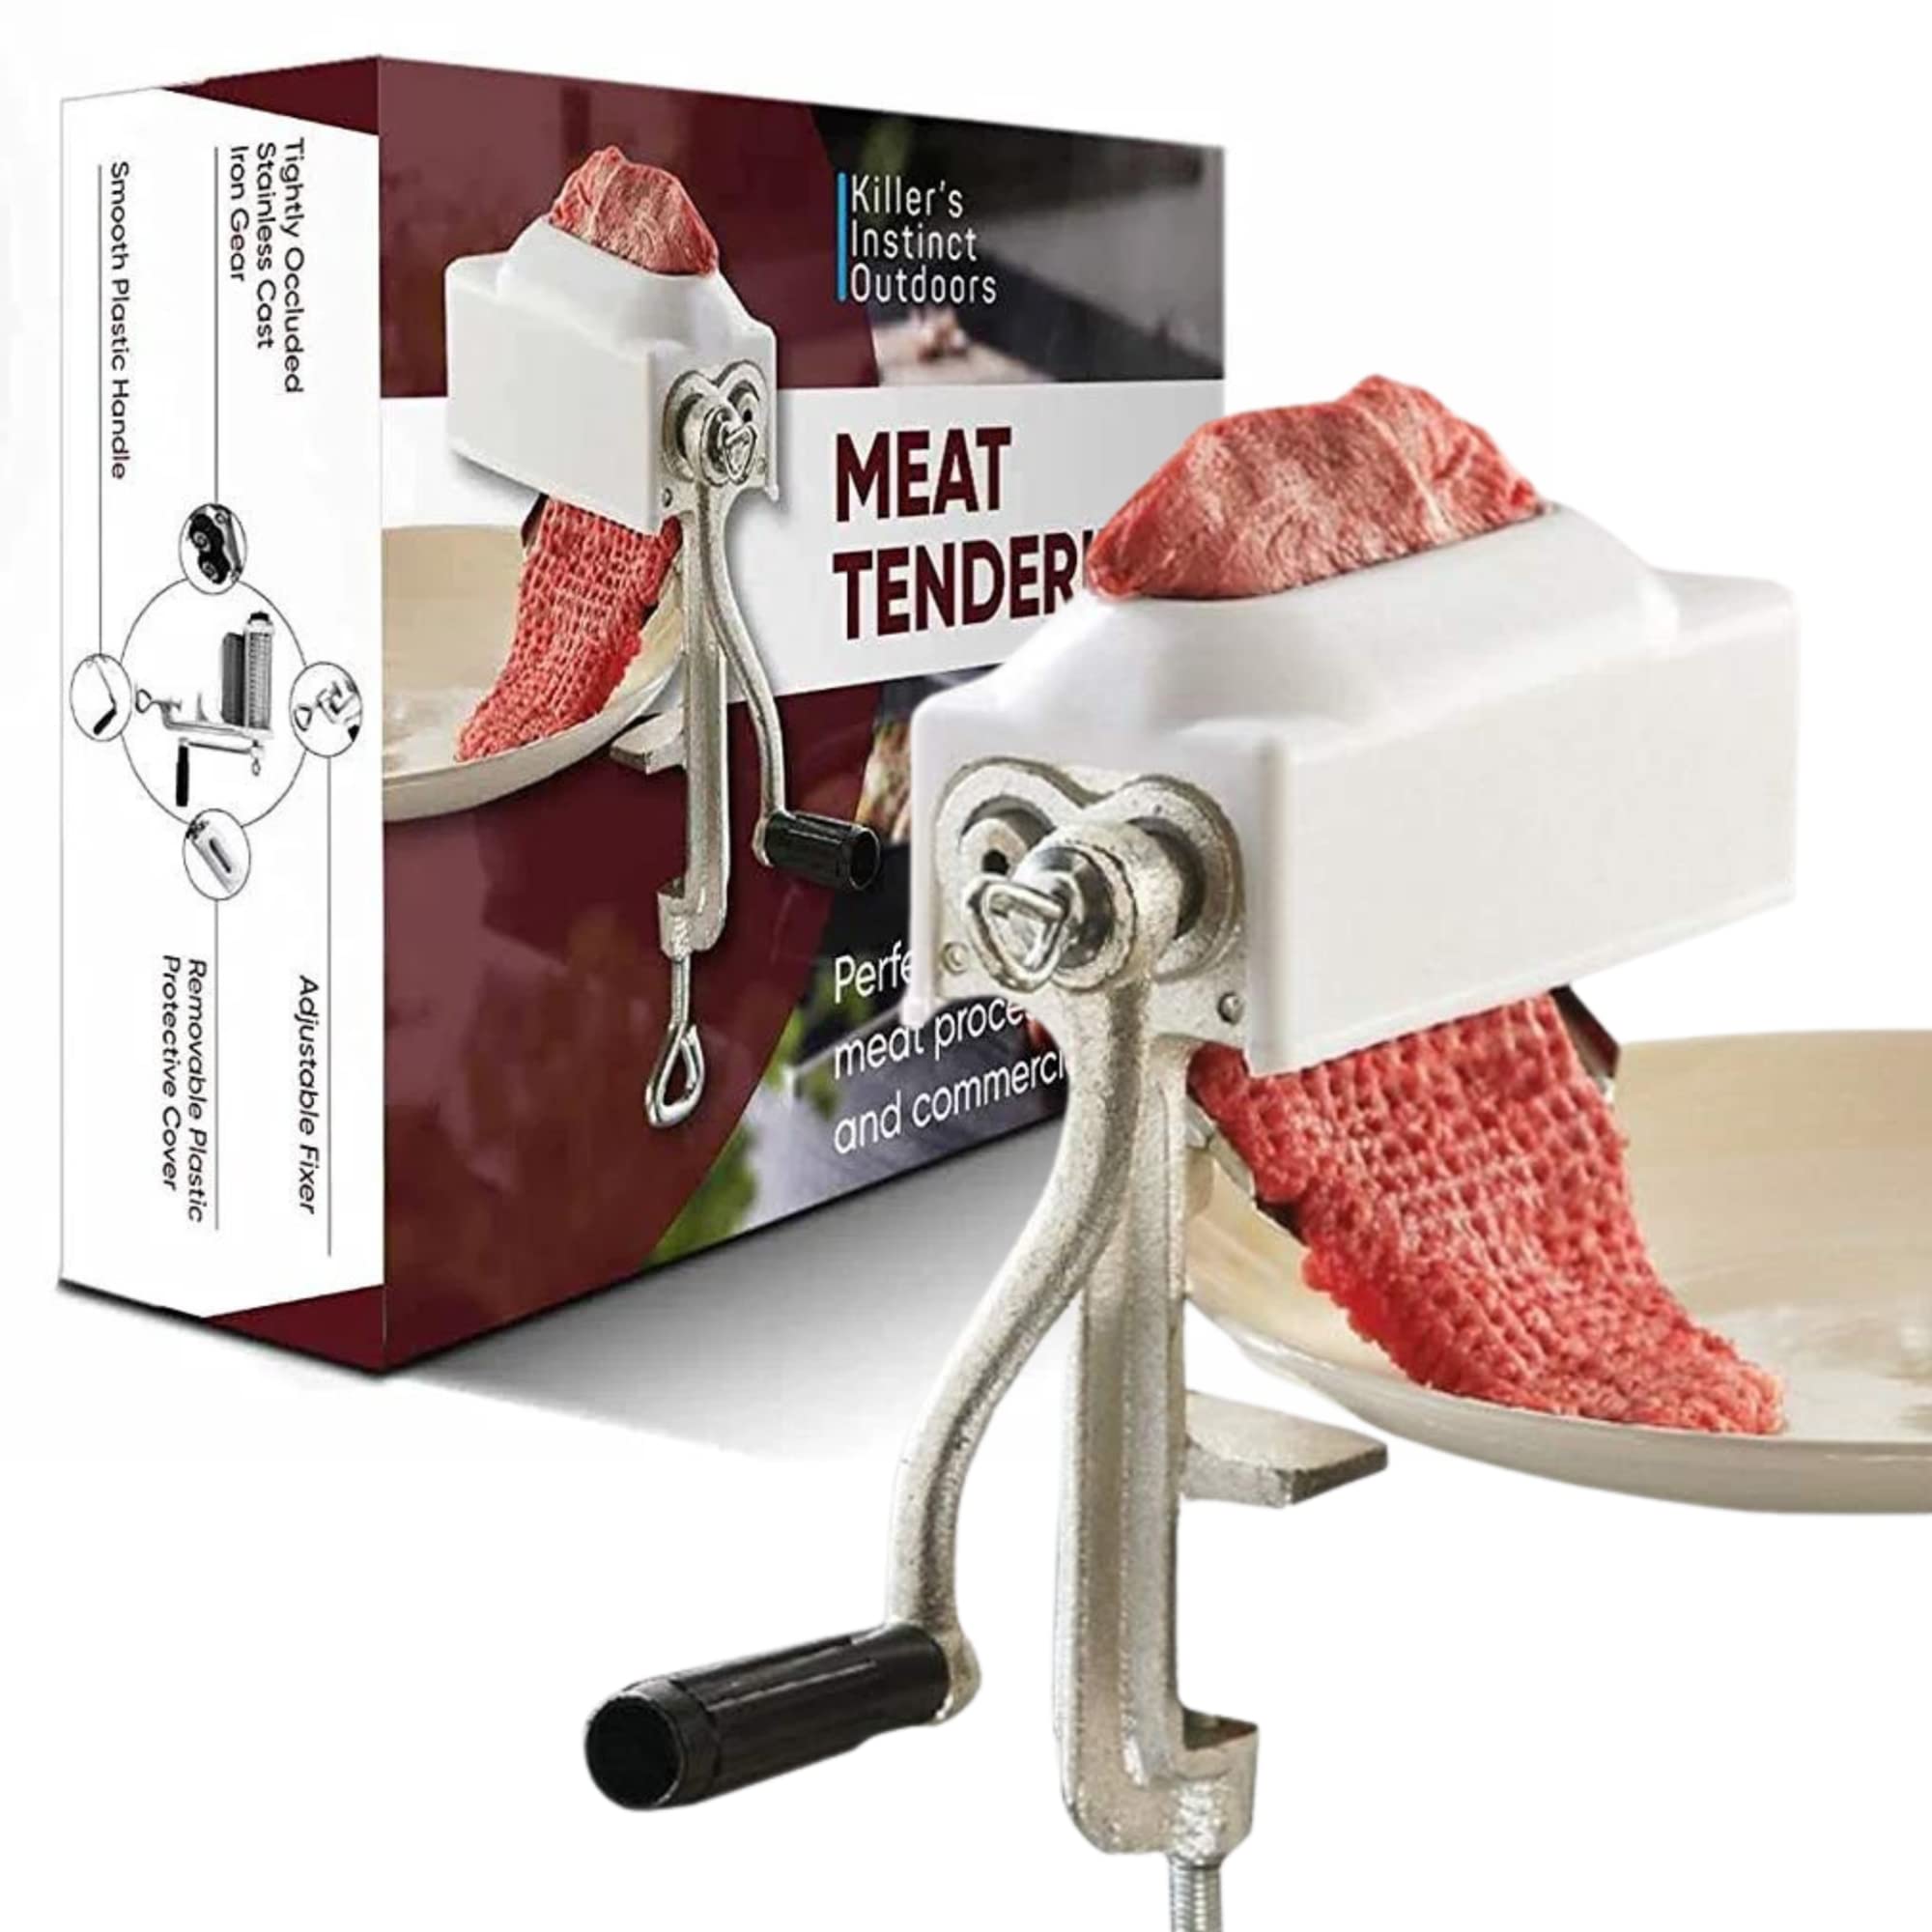 Killers Instinct Out Commercial Meat Tenderizer Cuber Heavy Duty Steak Flatten Tool Meat Tenderizer Tool Meat Grinder Attachment Clamp-on Meat Tender